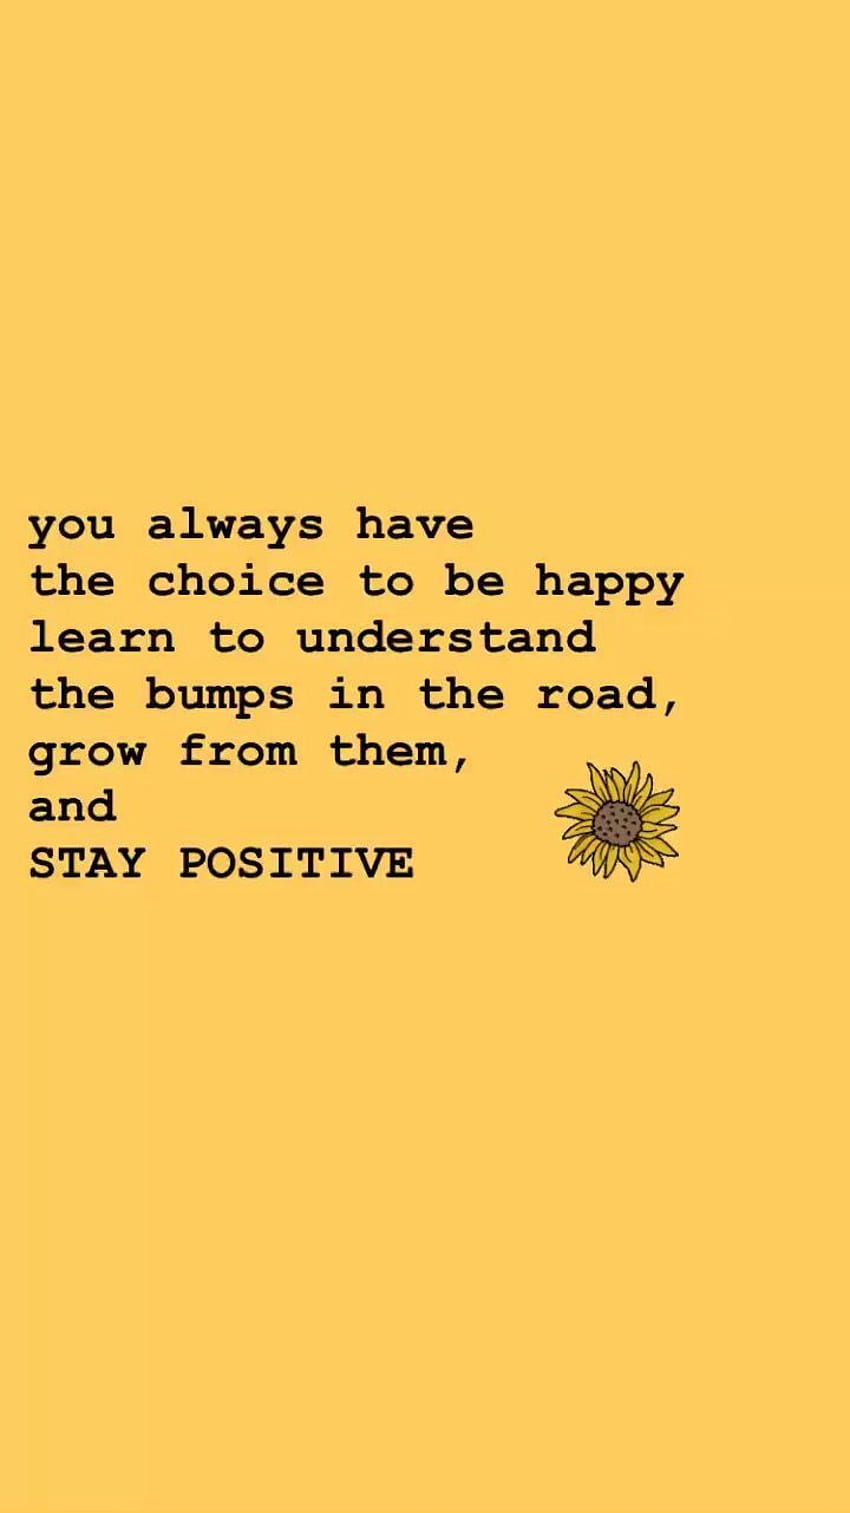 You always have the choice to be happy - Positivity